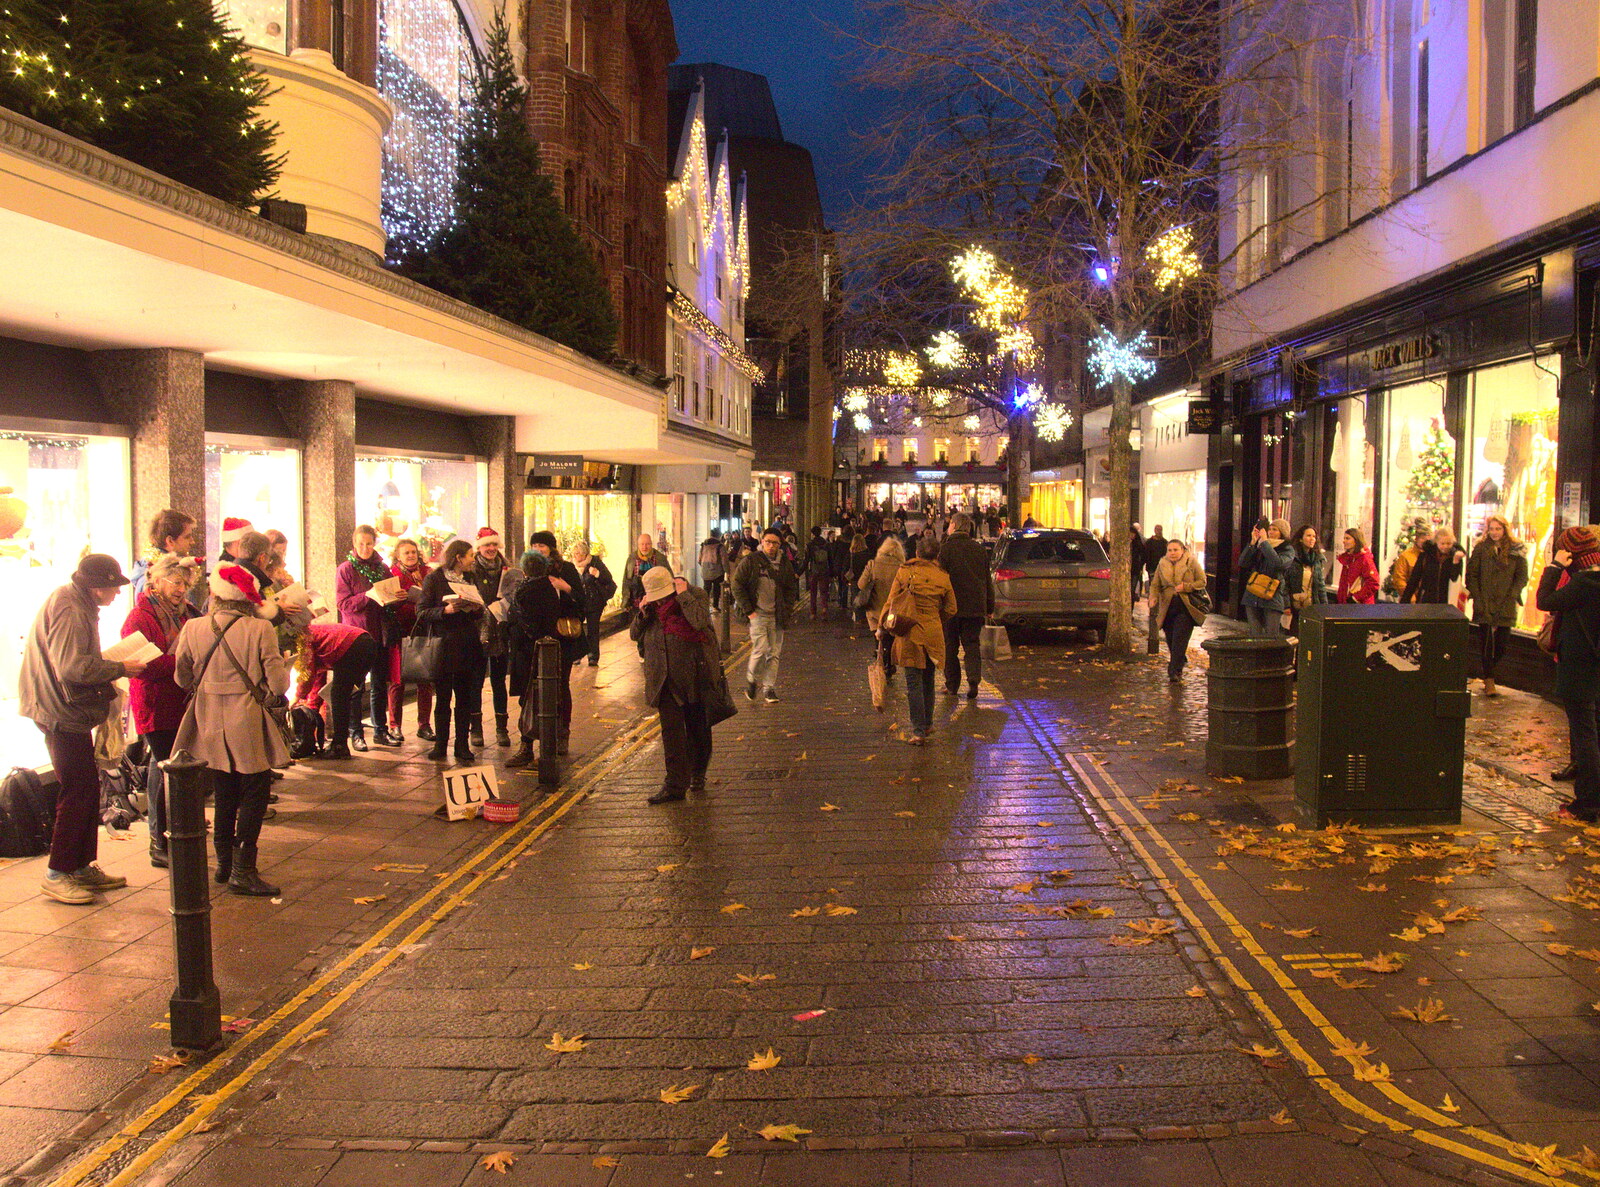 London Street in Norwich from Southwark, Norwich, and a Power Cut, London, Norfolk and Suffolk - 12th December 2015